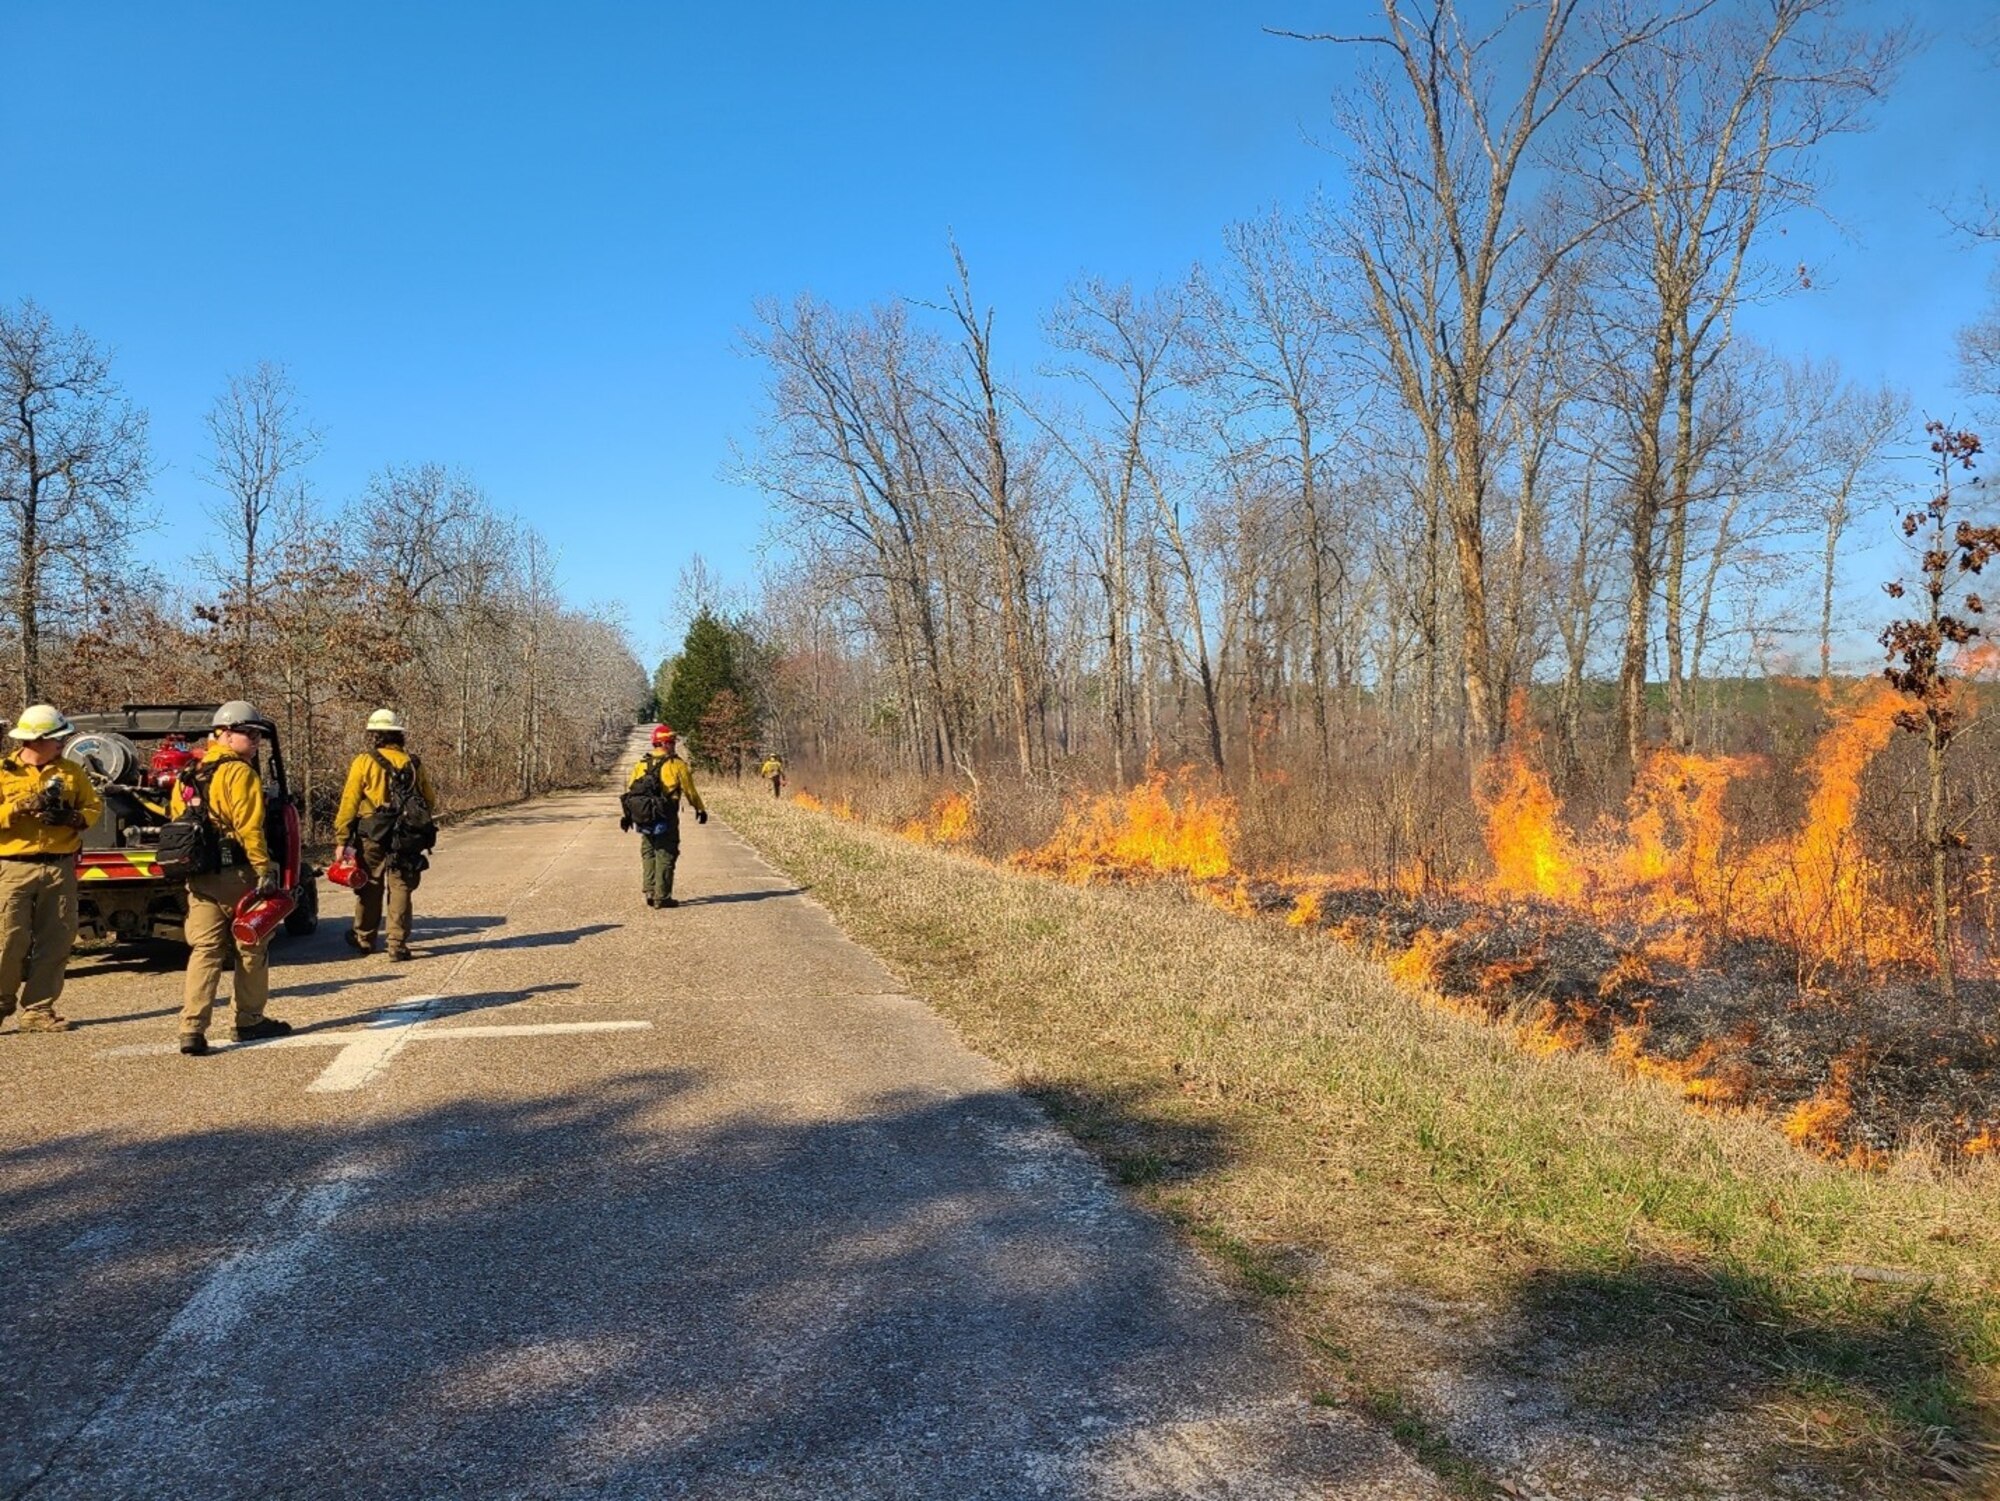 Crews monitor a previous prescribed fire, or controlled burn, at Arnold Air Force Base, Tennessee, in spring 2021. This spring, the natural resources staff at Arnold Air Force Base will work with the Air Force Wildland Fire Branch to conduct prescribed fires across Arnold. Prescribed fire allows land managers to alter and improve the native ecosystems without utilizing more costly methods such as mulching, mowing and herbicide applications. (Courtesy photo by Brenton Berlin)